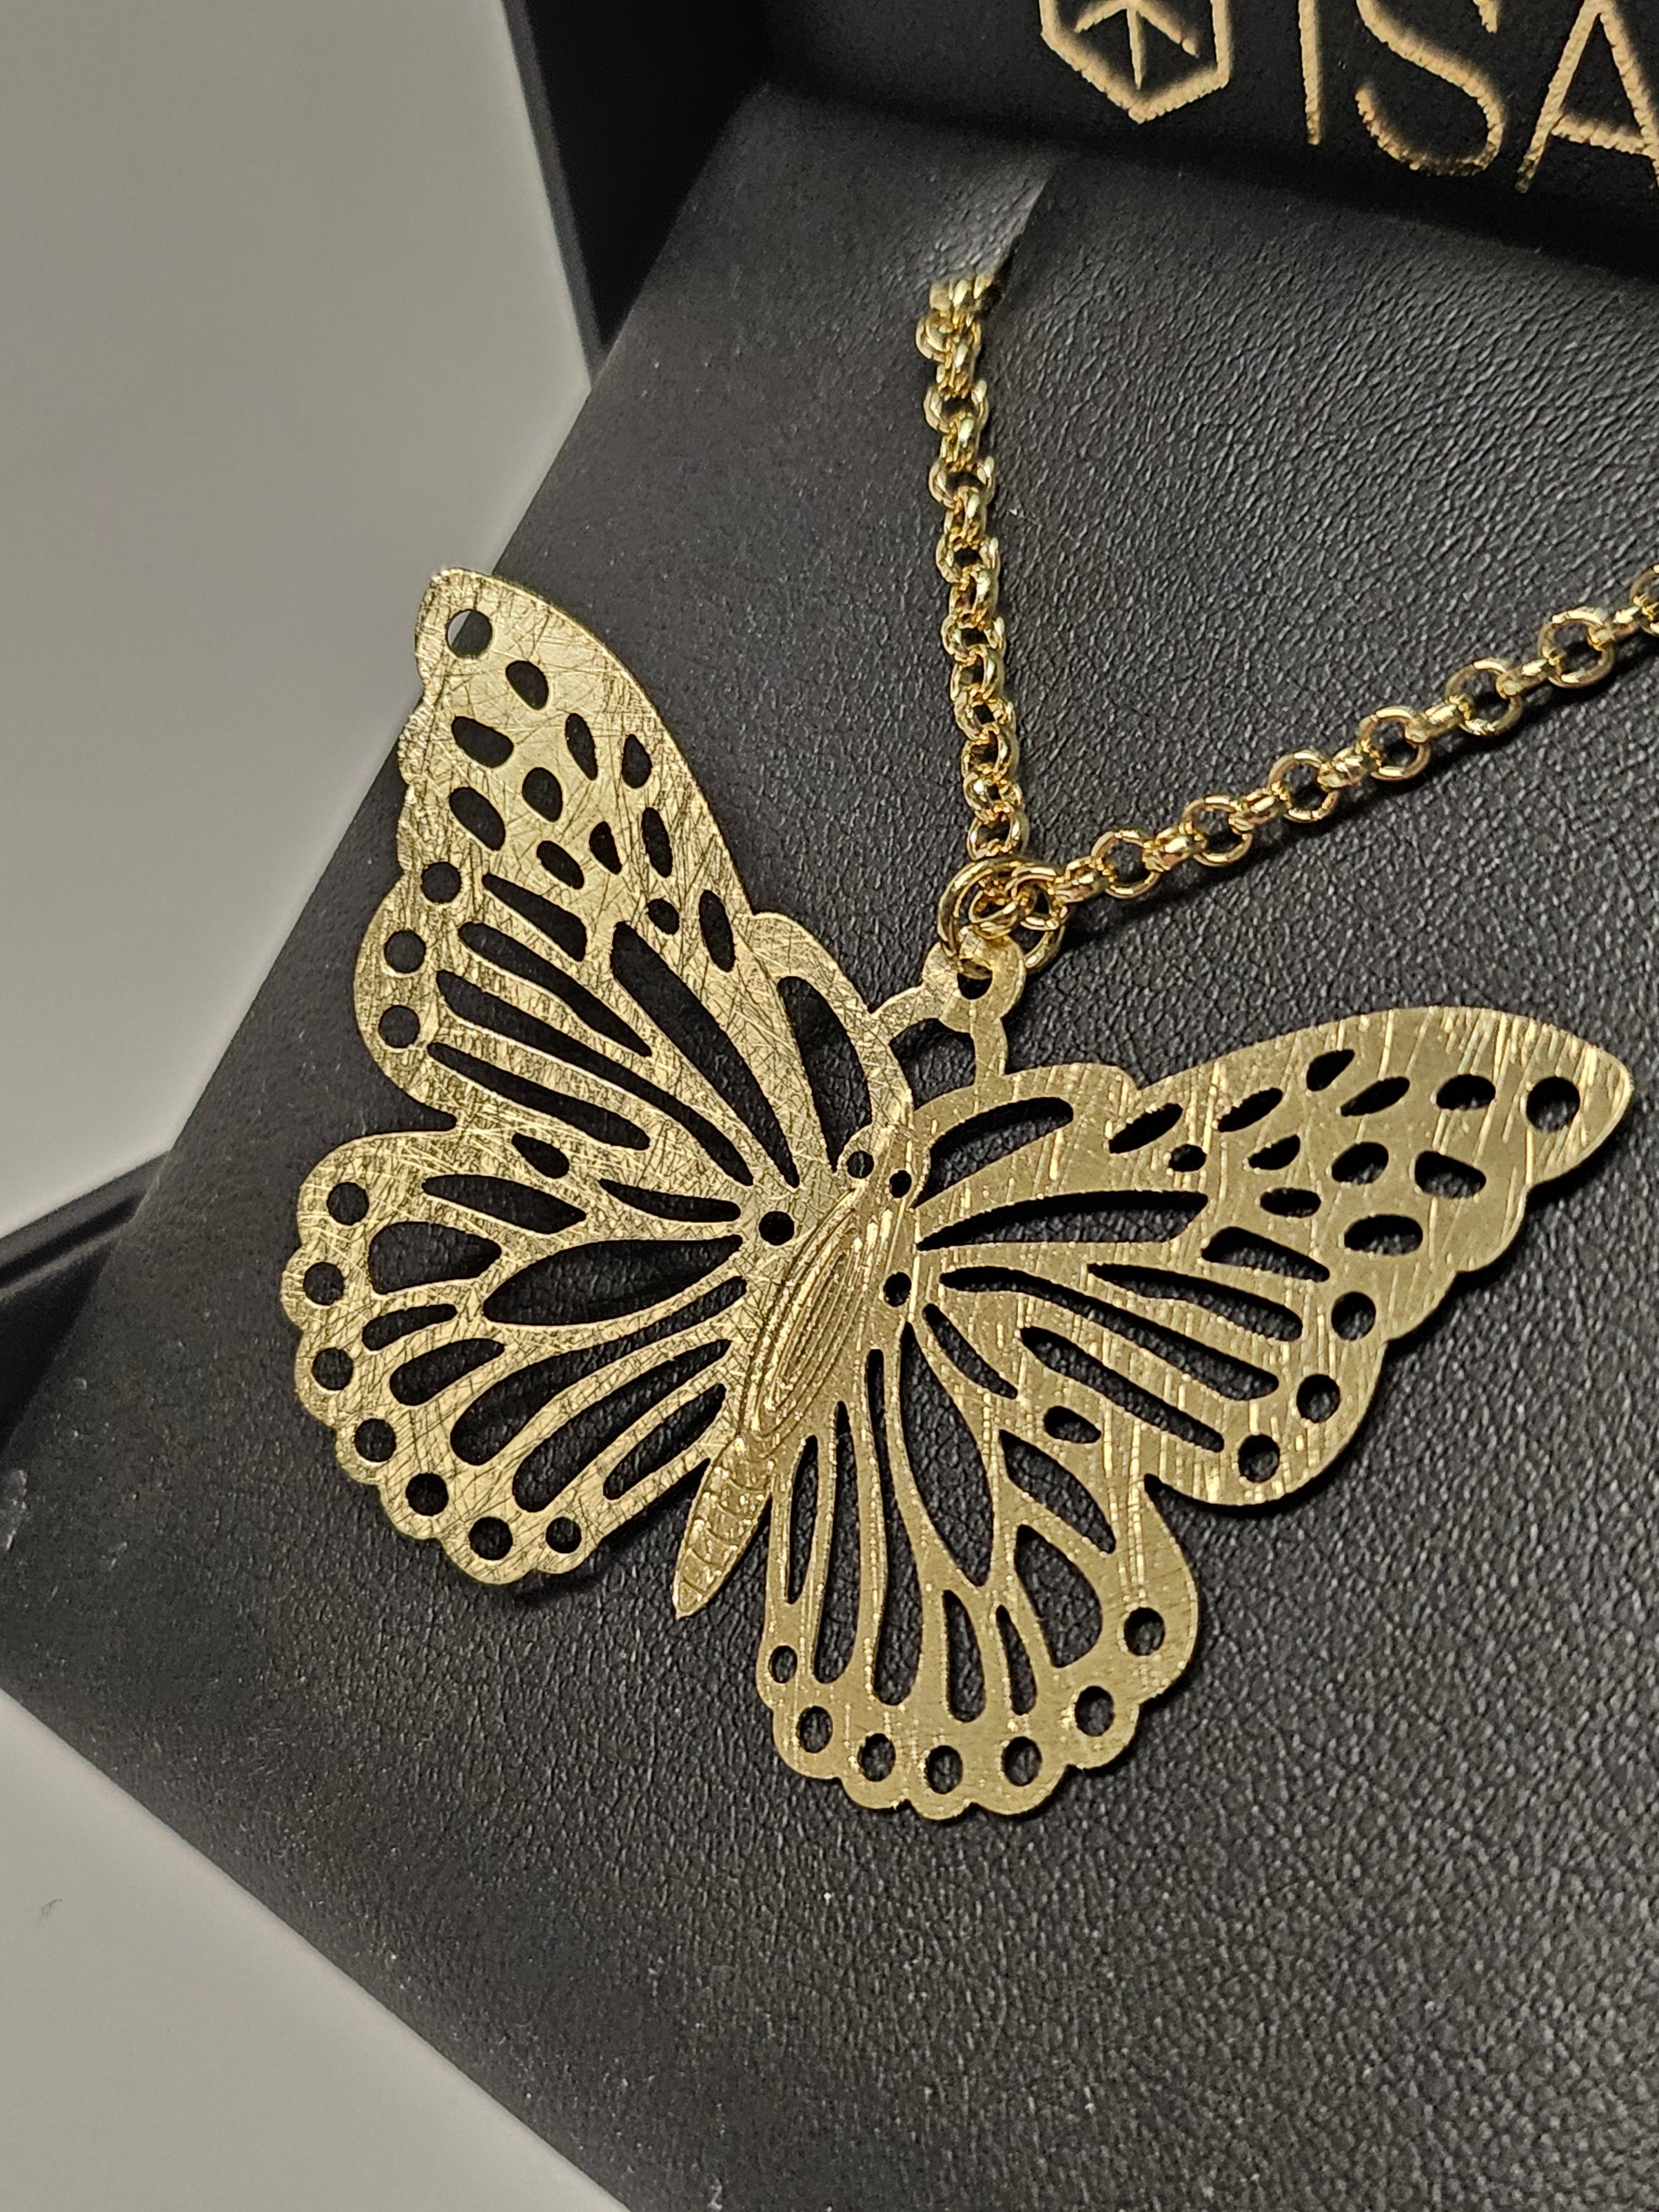 ISARA Necklace - Butterfly - 3021048